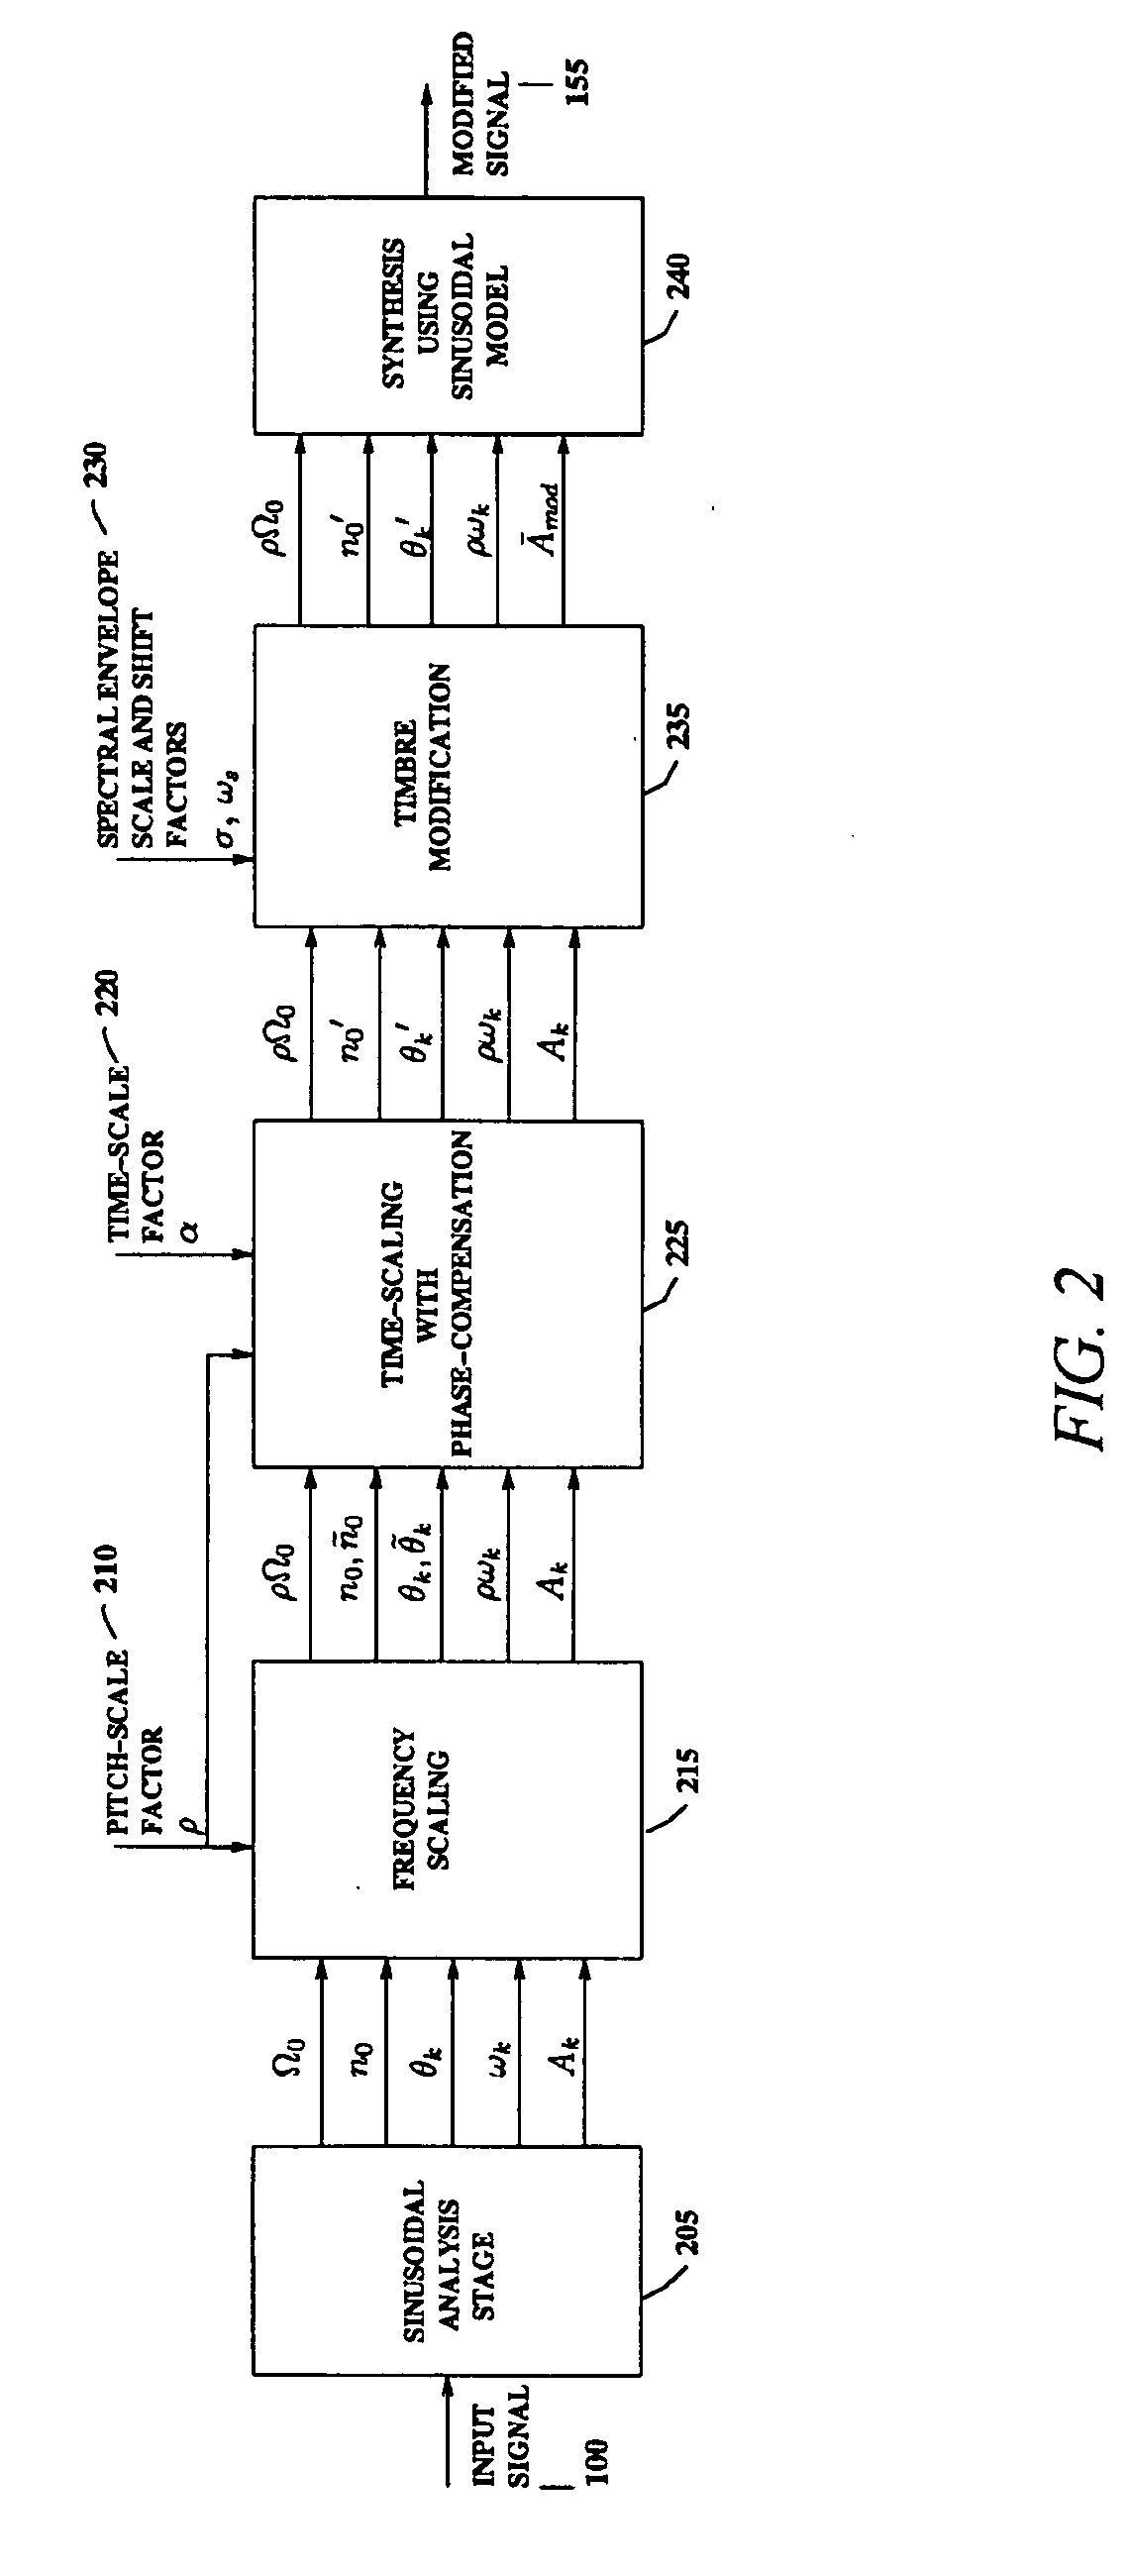 Modification of acoustic signals using sinusoidal analysis and synthesis